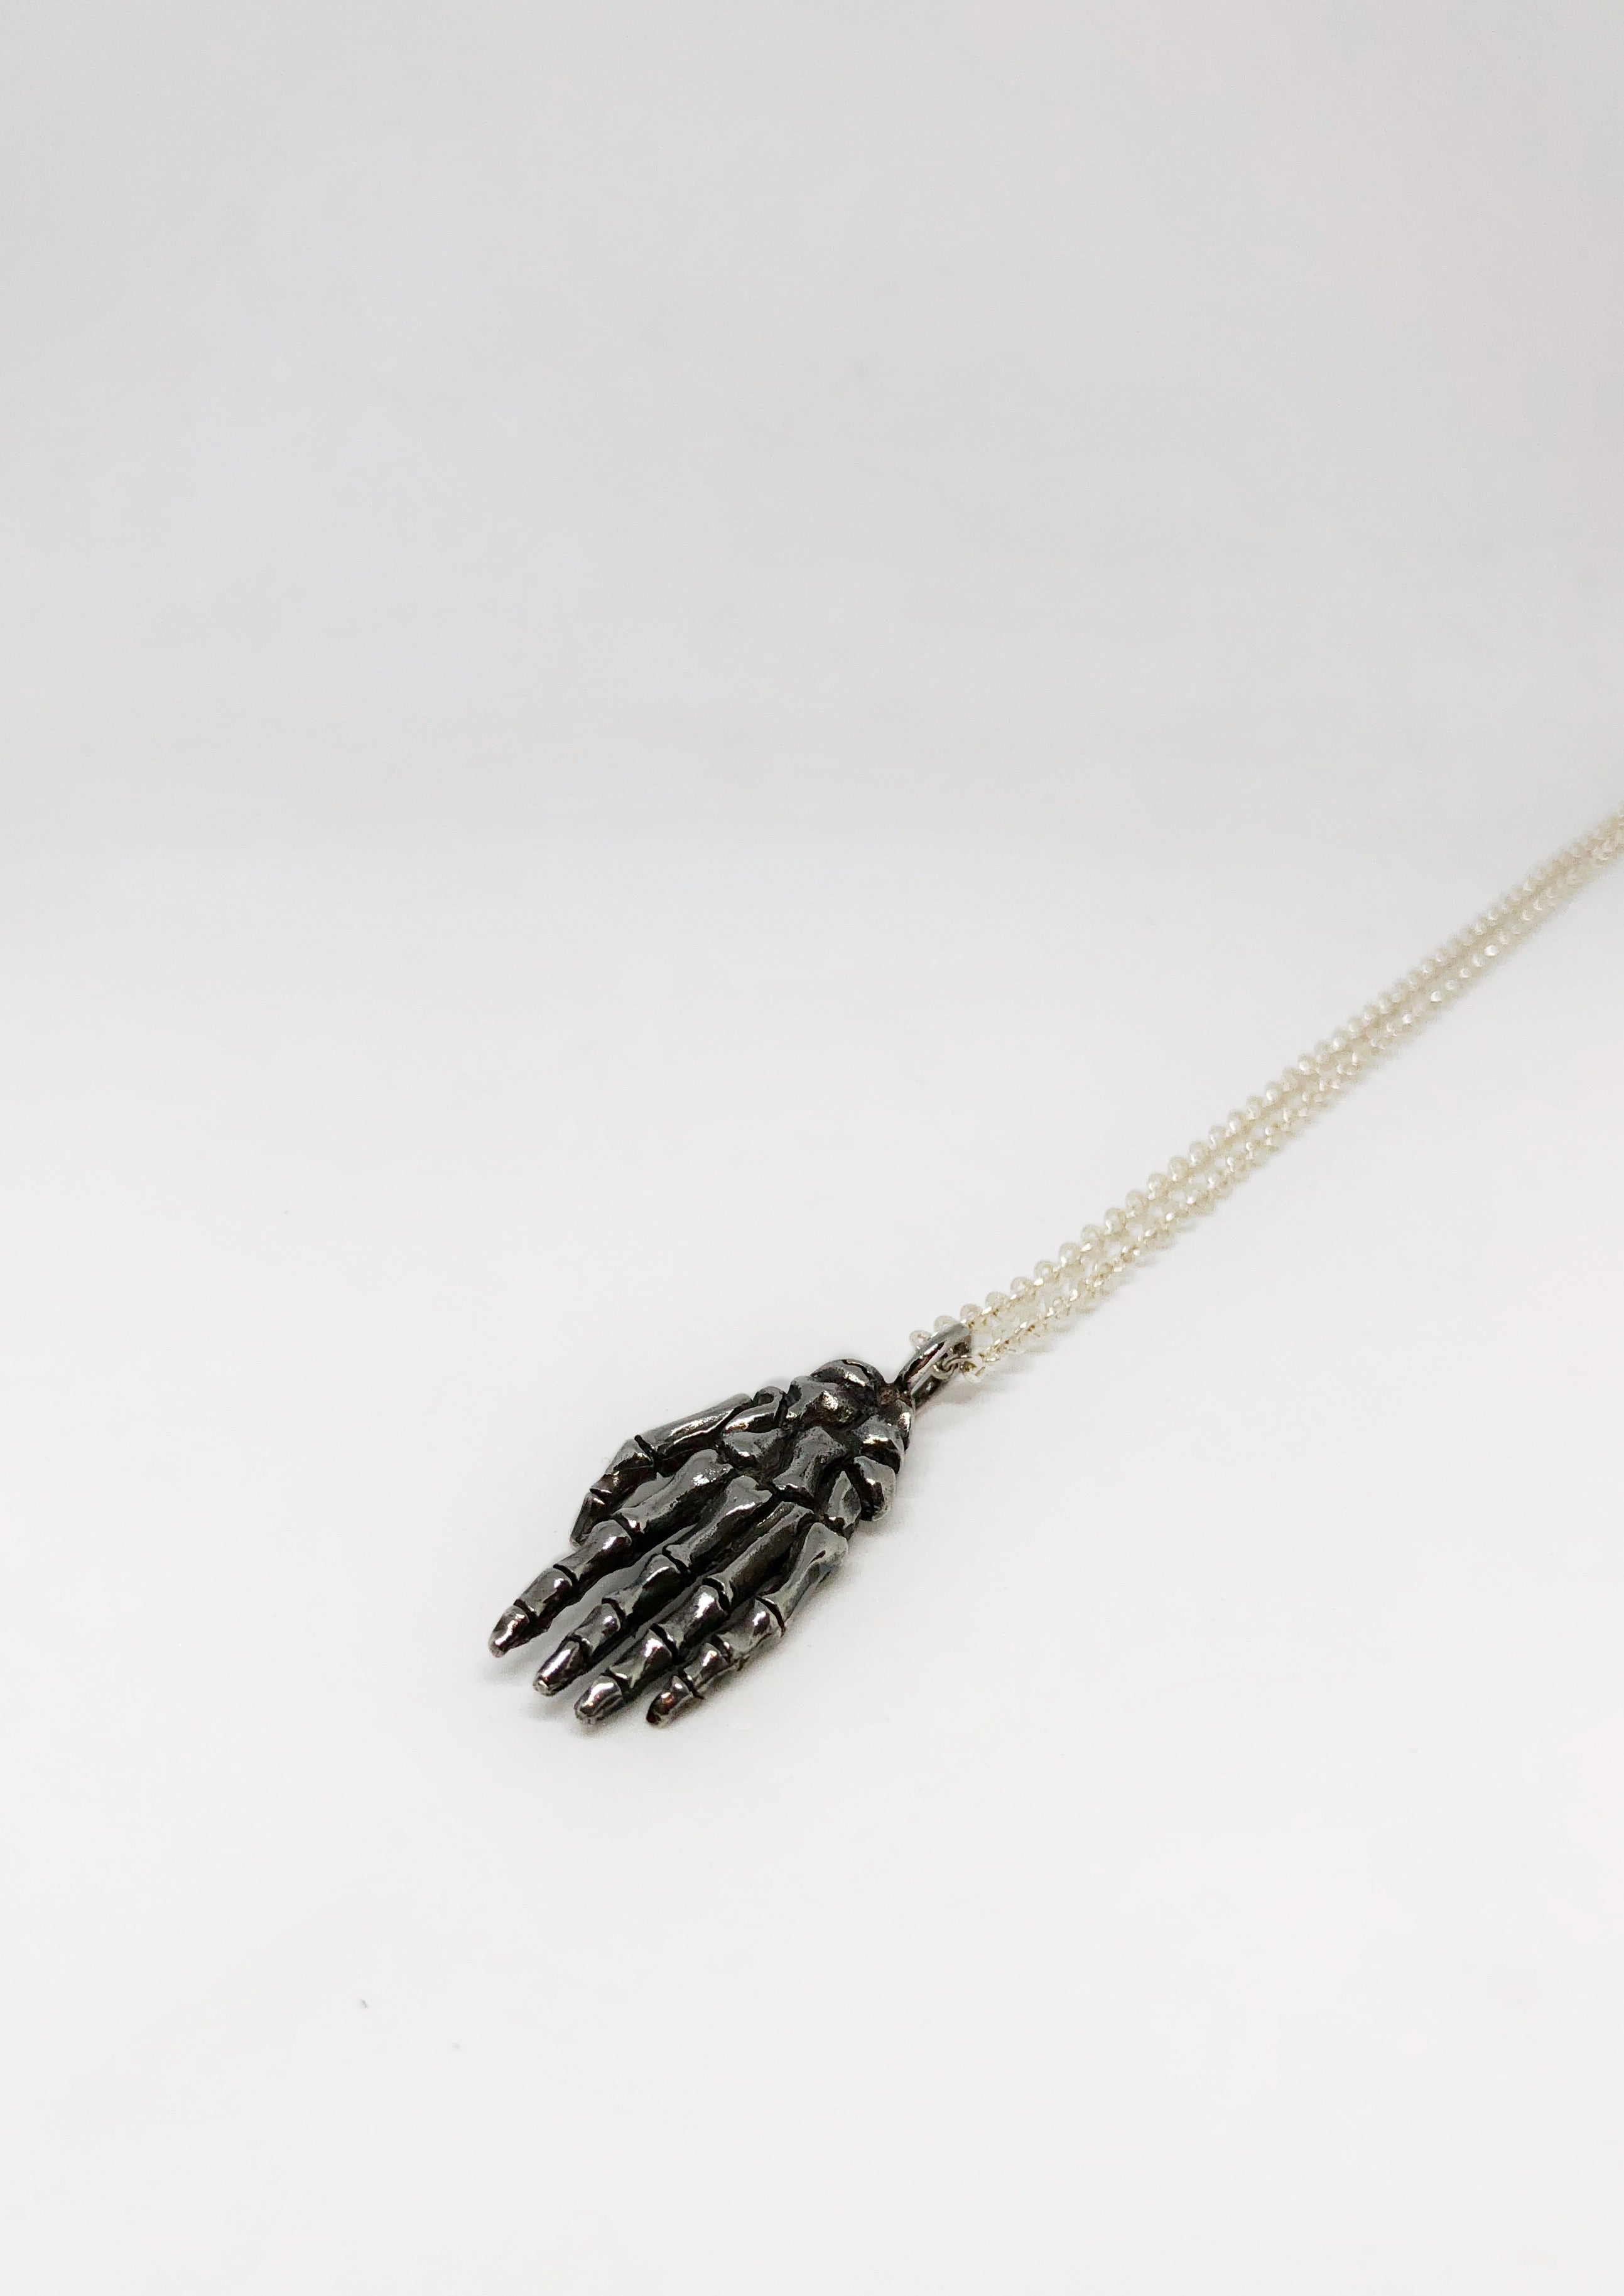 Skeleton Hands Necklace touched by A Skeleton Halloween, Anatomical,  Skeletal, Hand Bones, Zombie, X Ray, Dead, Spooky, Horror, Goth - Etsy